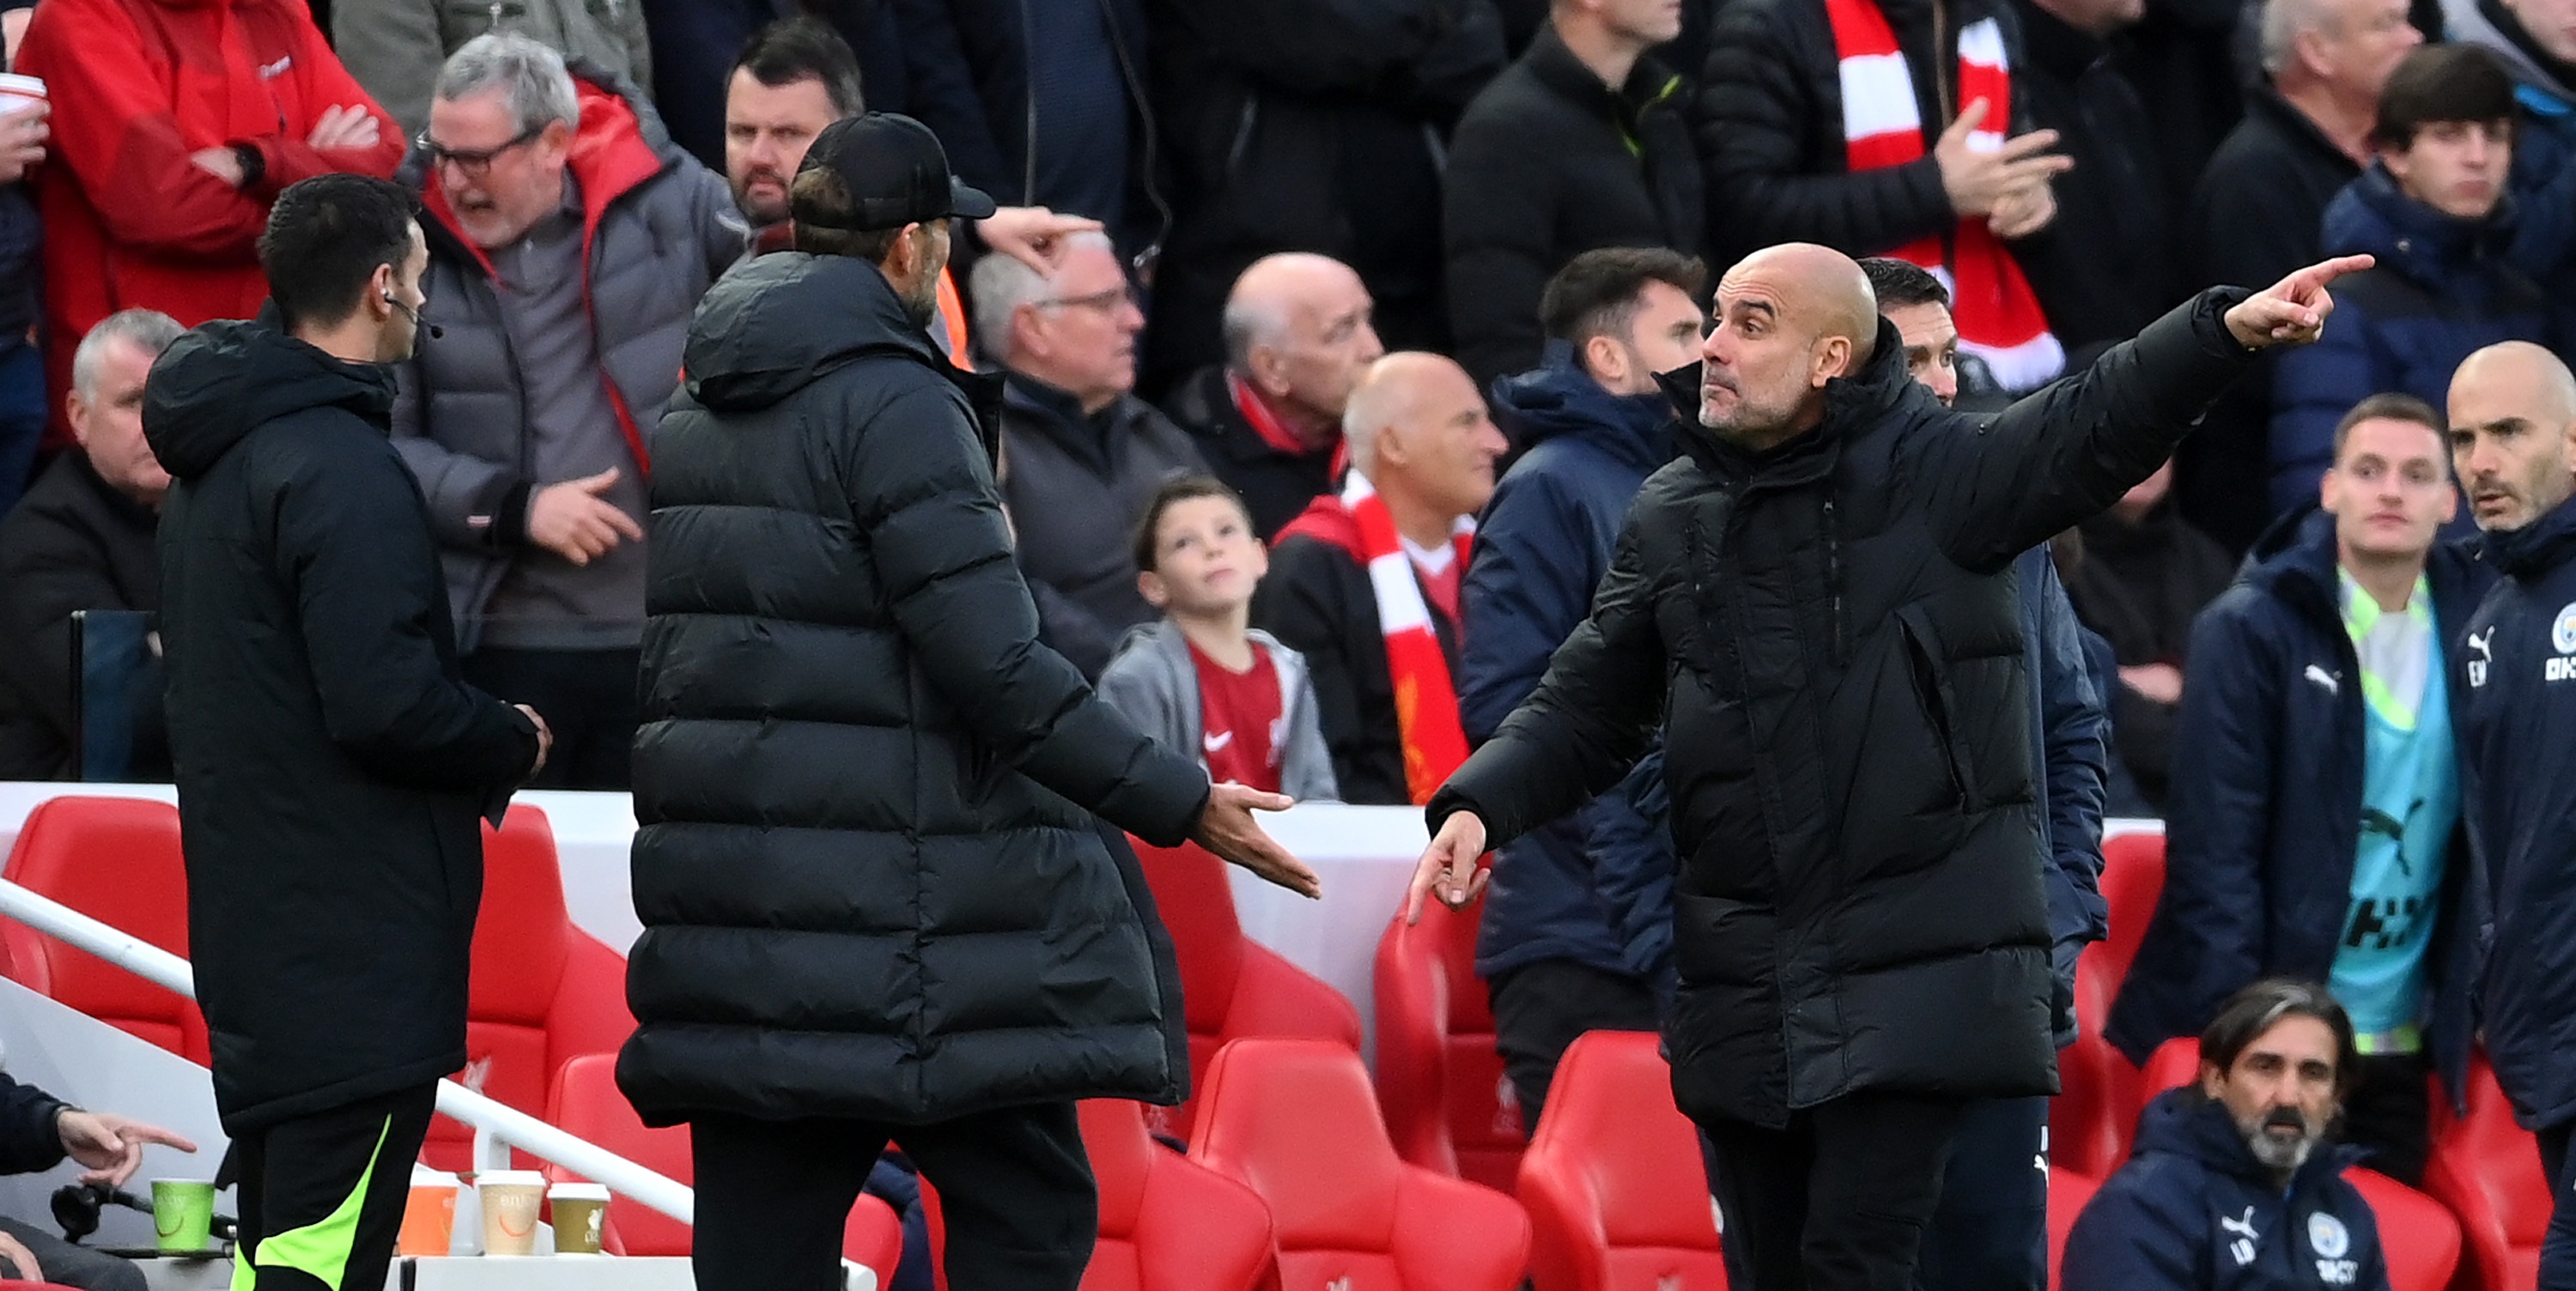 Guardiola denies LFC v Man City is toxic ‘from our side’ despite acknowledging vile Hillsborough chants